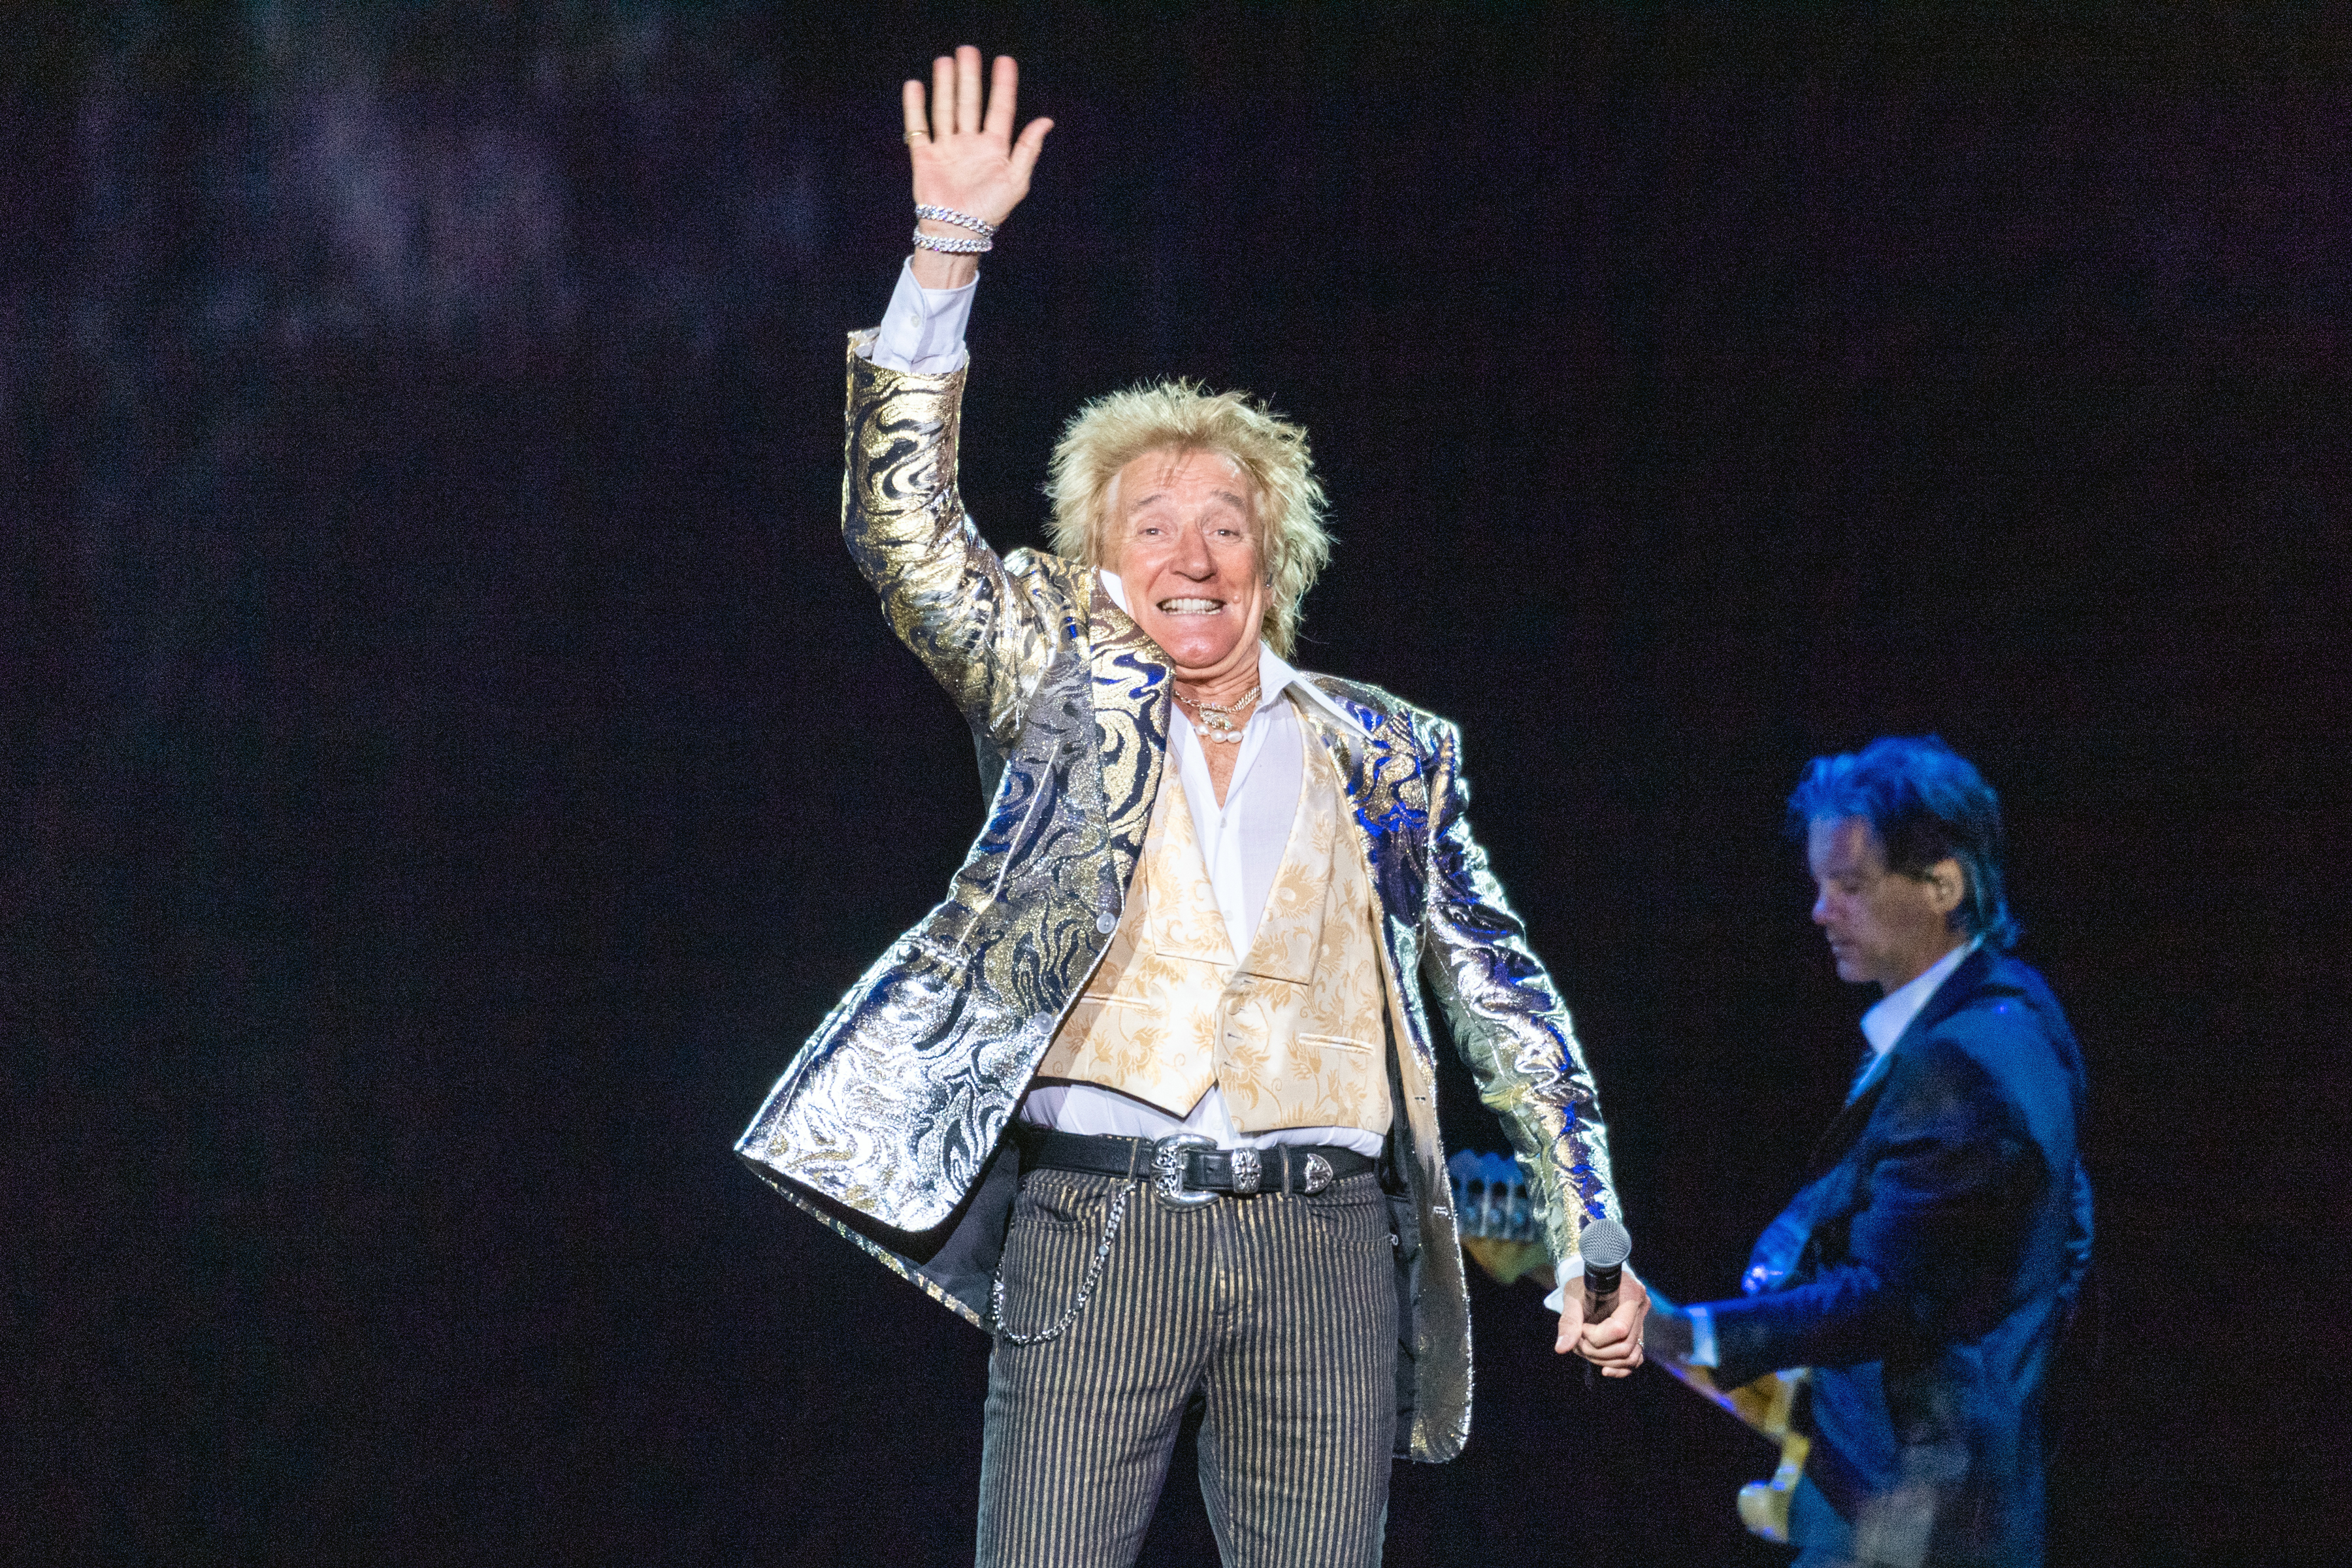 Sir Rod Stewart on stage at The OVO Hydro in Glasgow, Scotland, on November 29, 2022. | Source: Getty Images